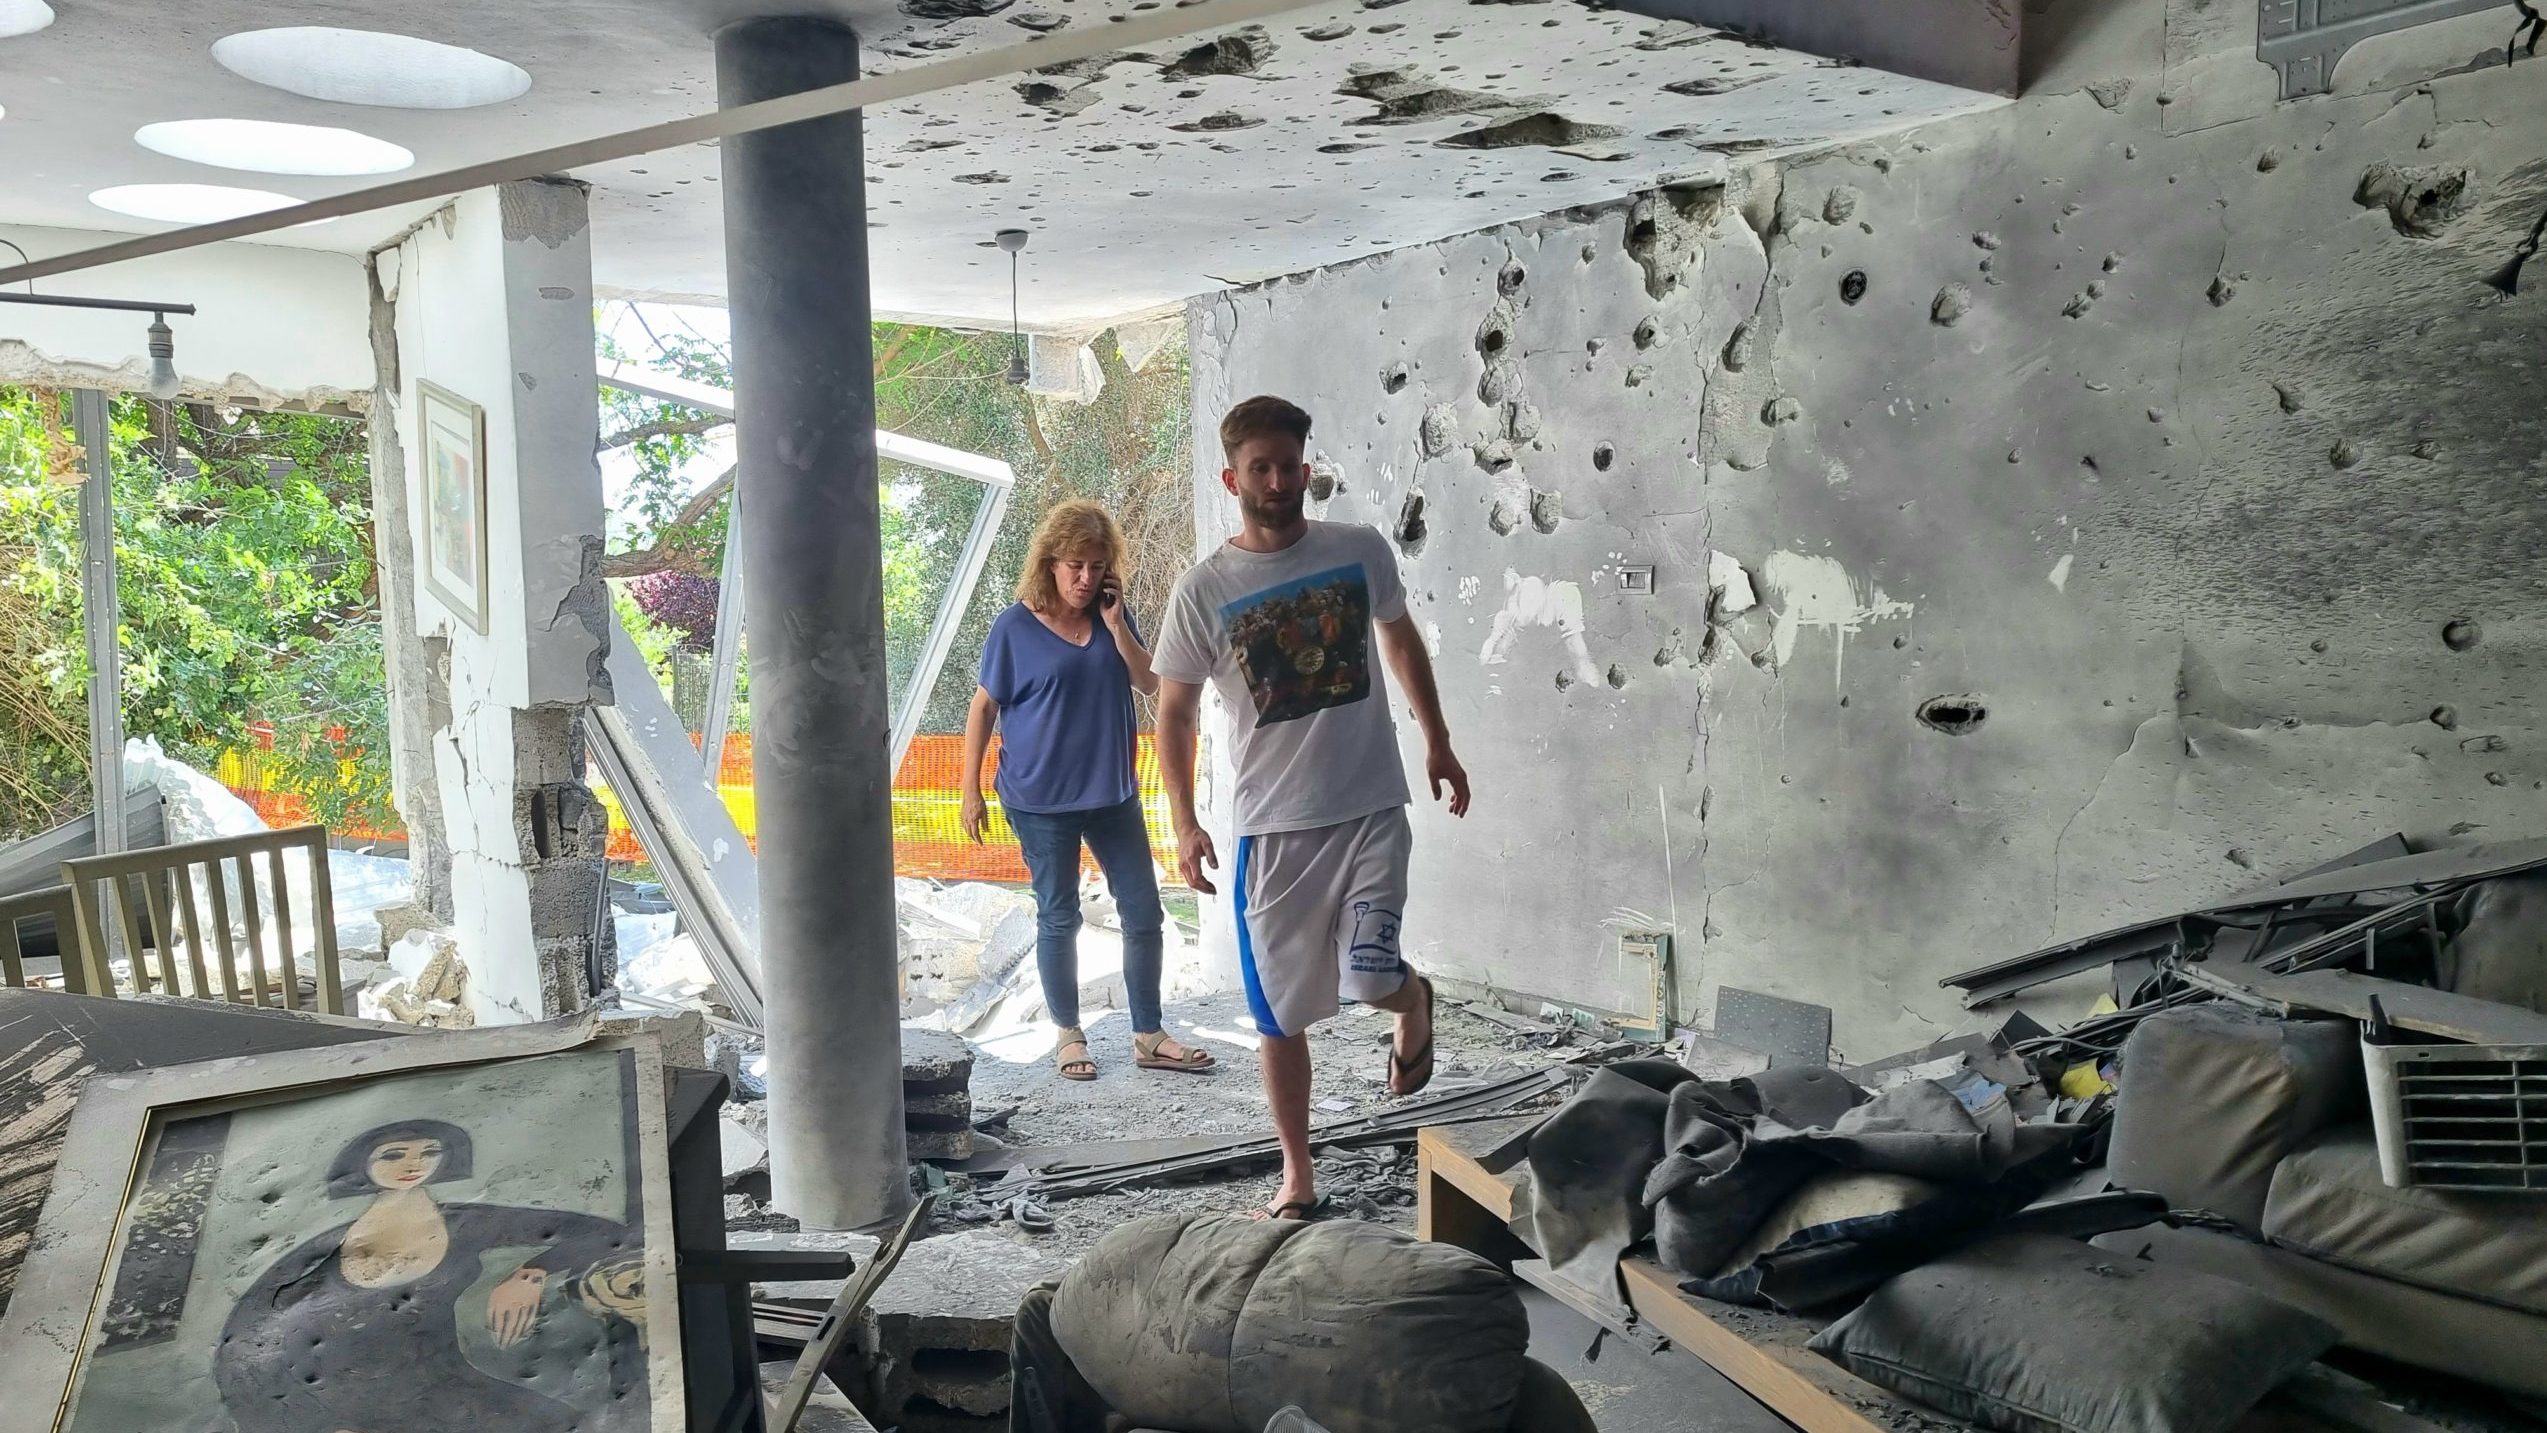 Israeli Woman Vows to Rebuild After Home Destroyed By Rocket From Gaza